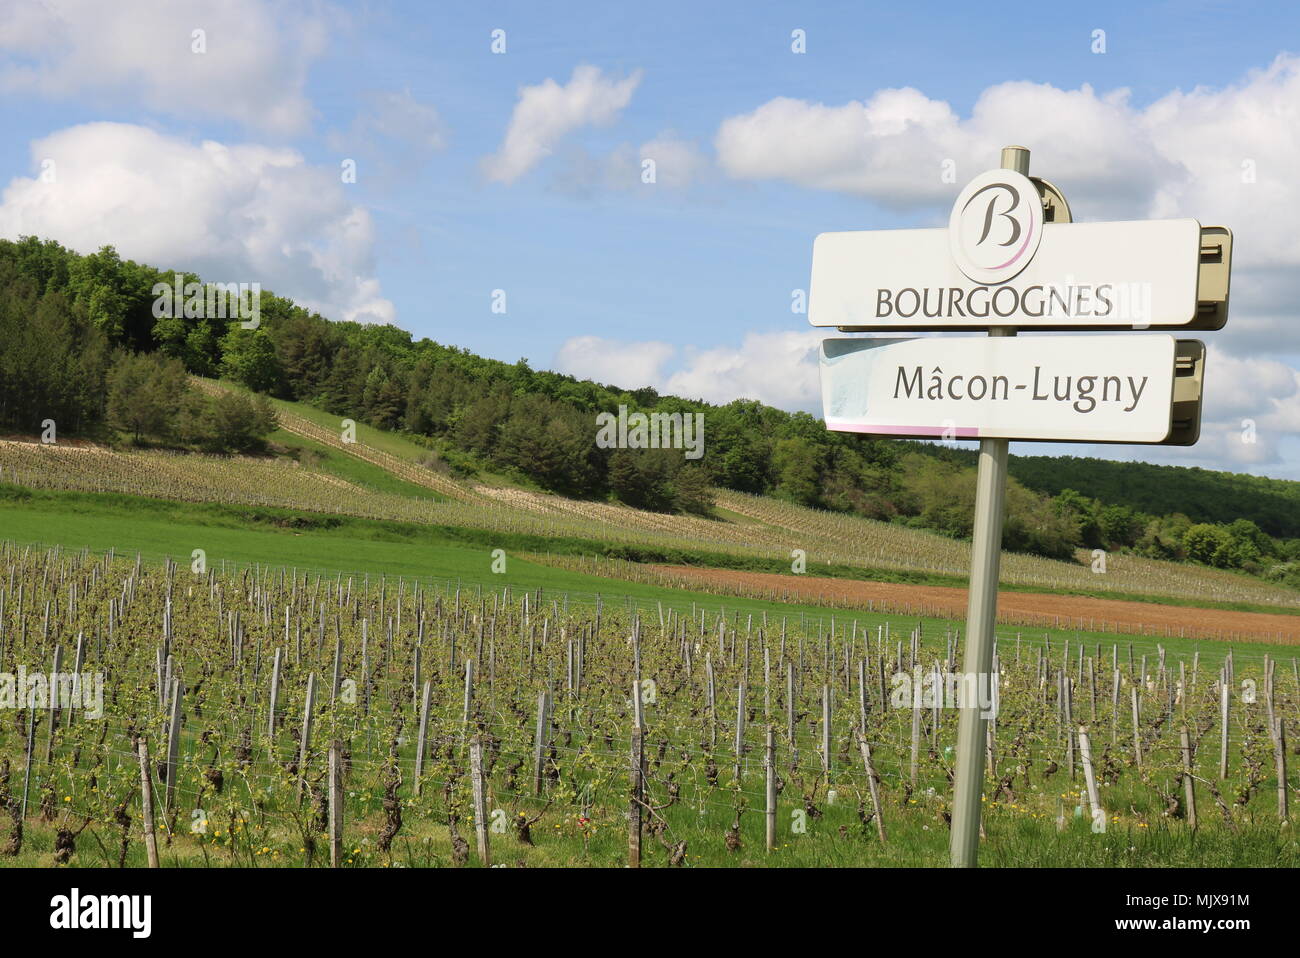 Vines growing in Macon Lugny, Bourgogne France and the sign showing the wine area Stock Photo